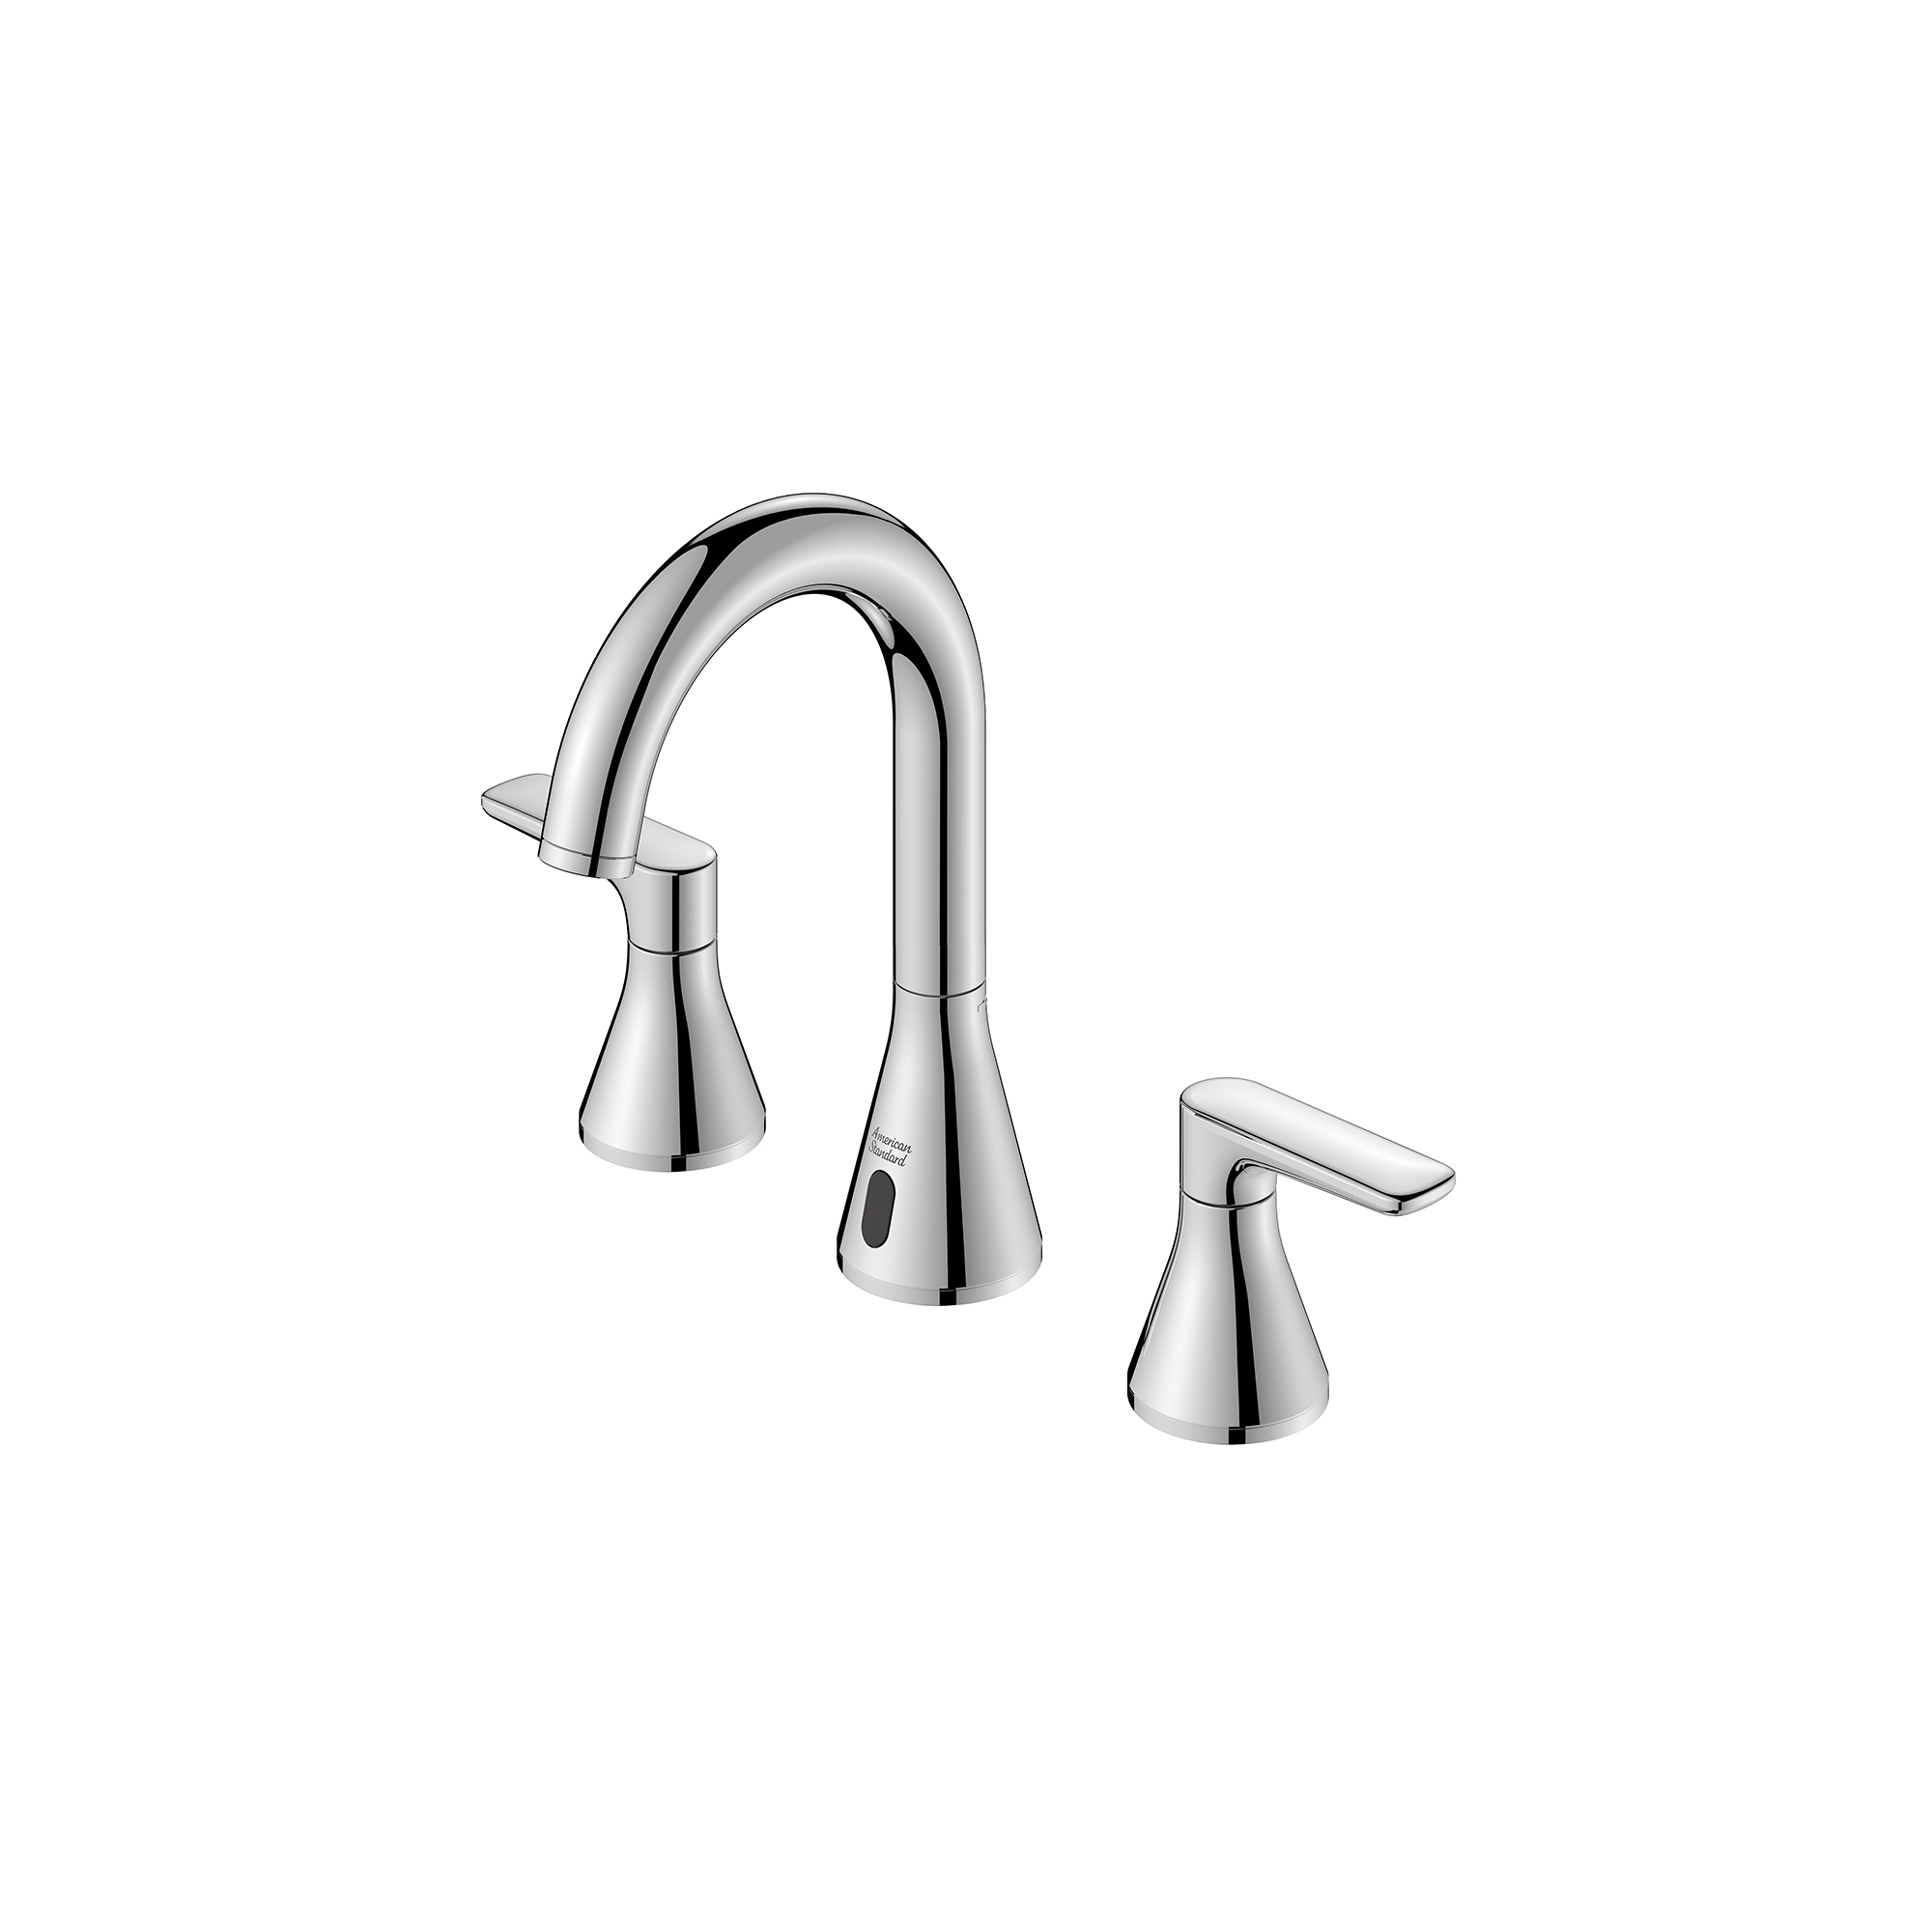 Aspirations™ 8-Inch Touchless Widespread Bathroom Faucet 1.2 gpm/4.5 L/min With Lever Handles